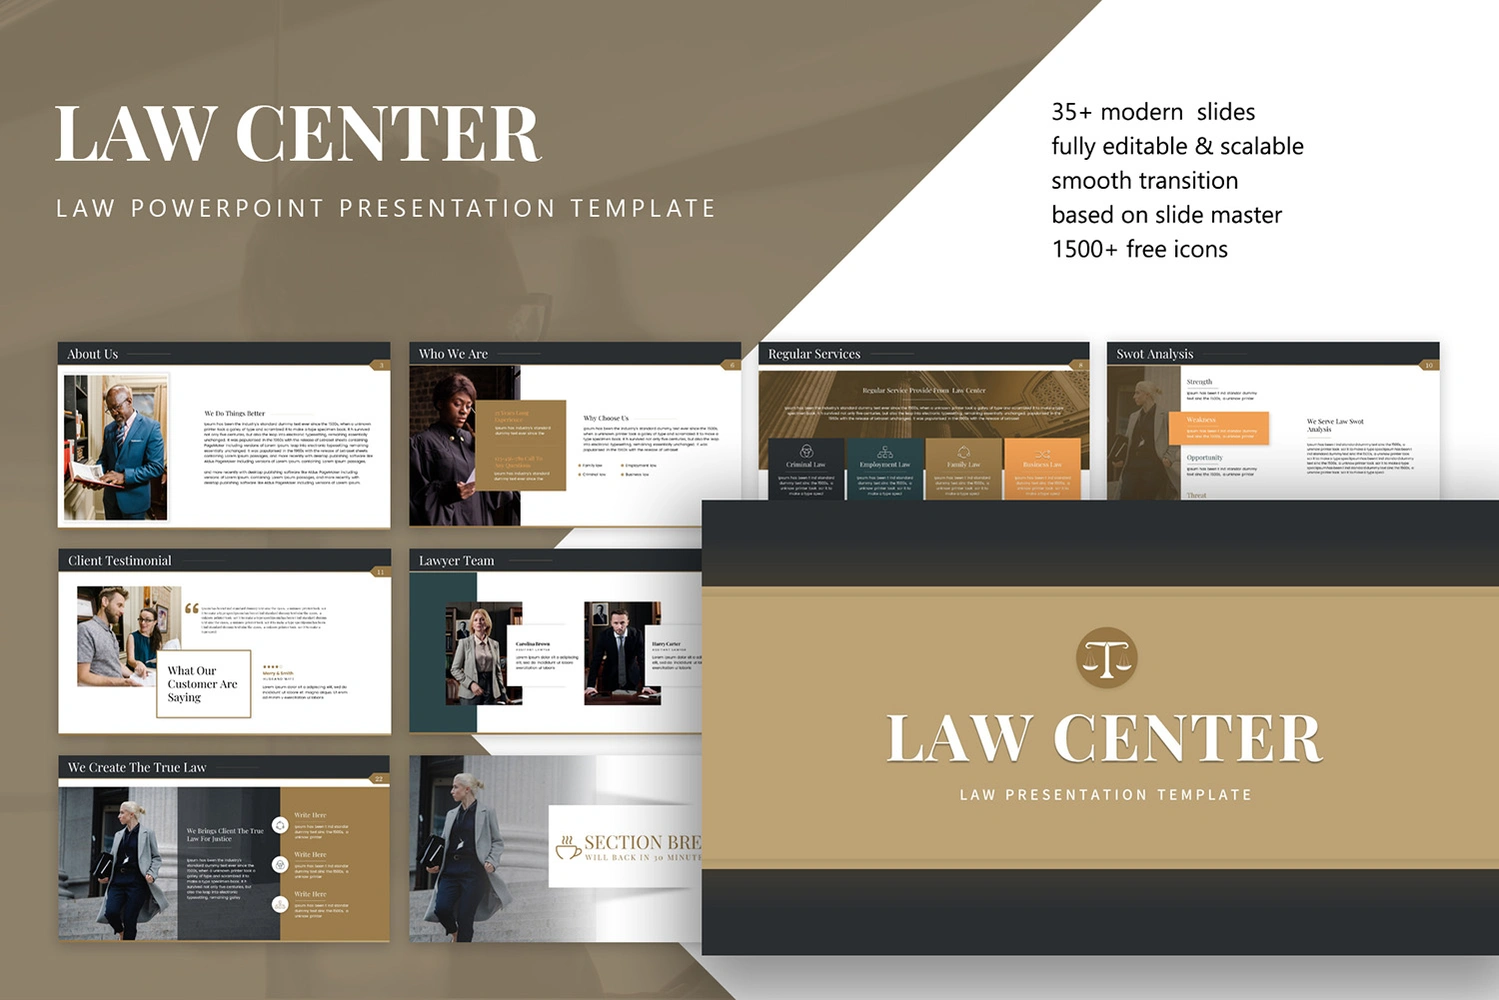 Law center - law powerpoint presentation template